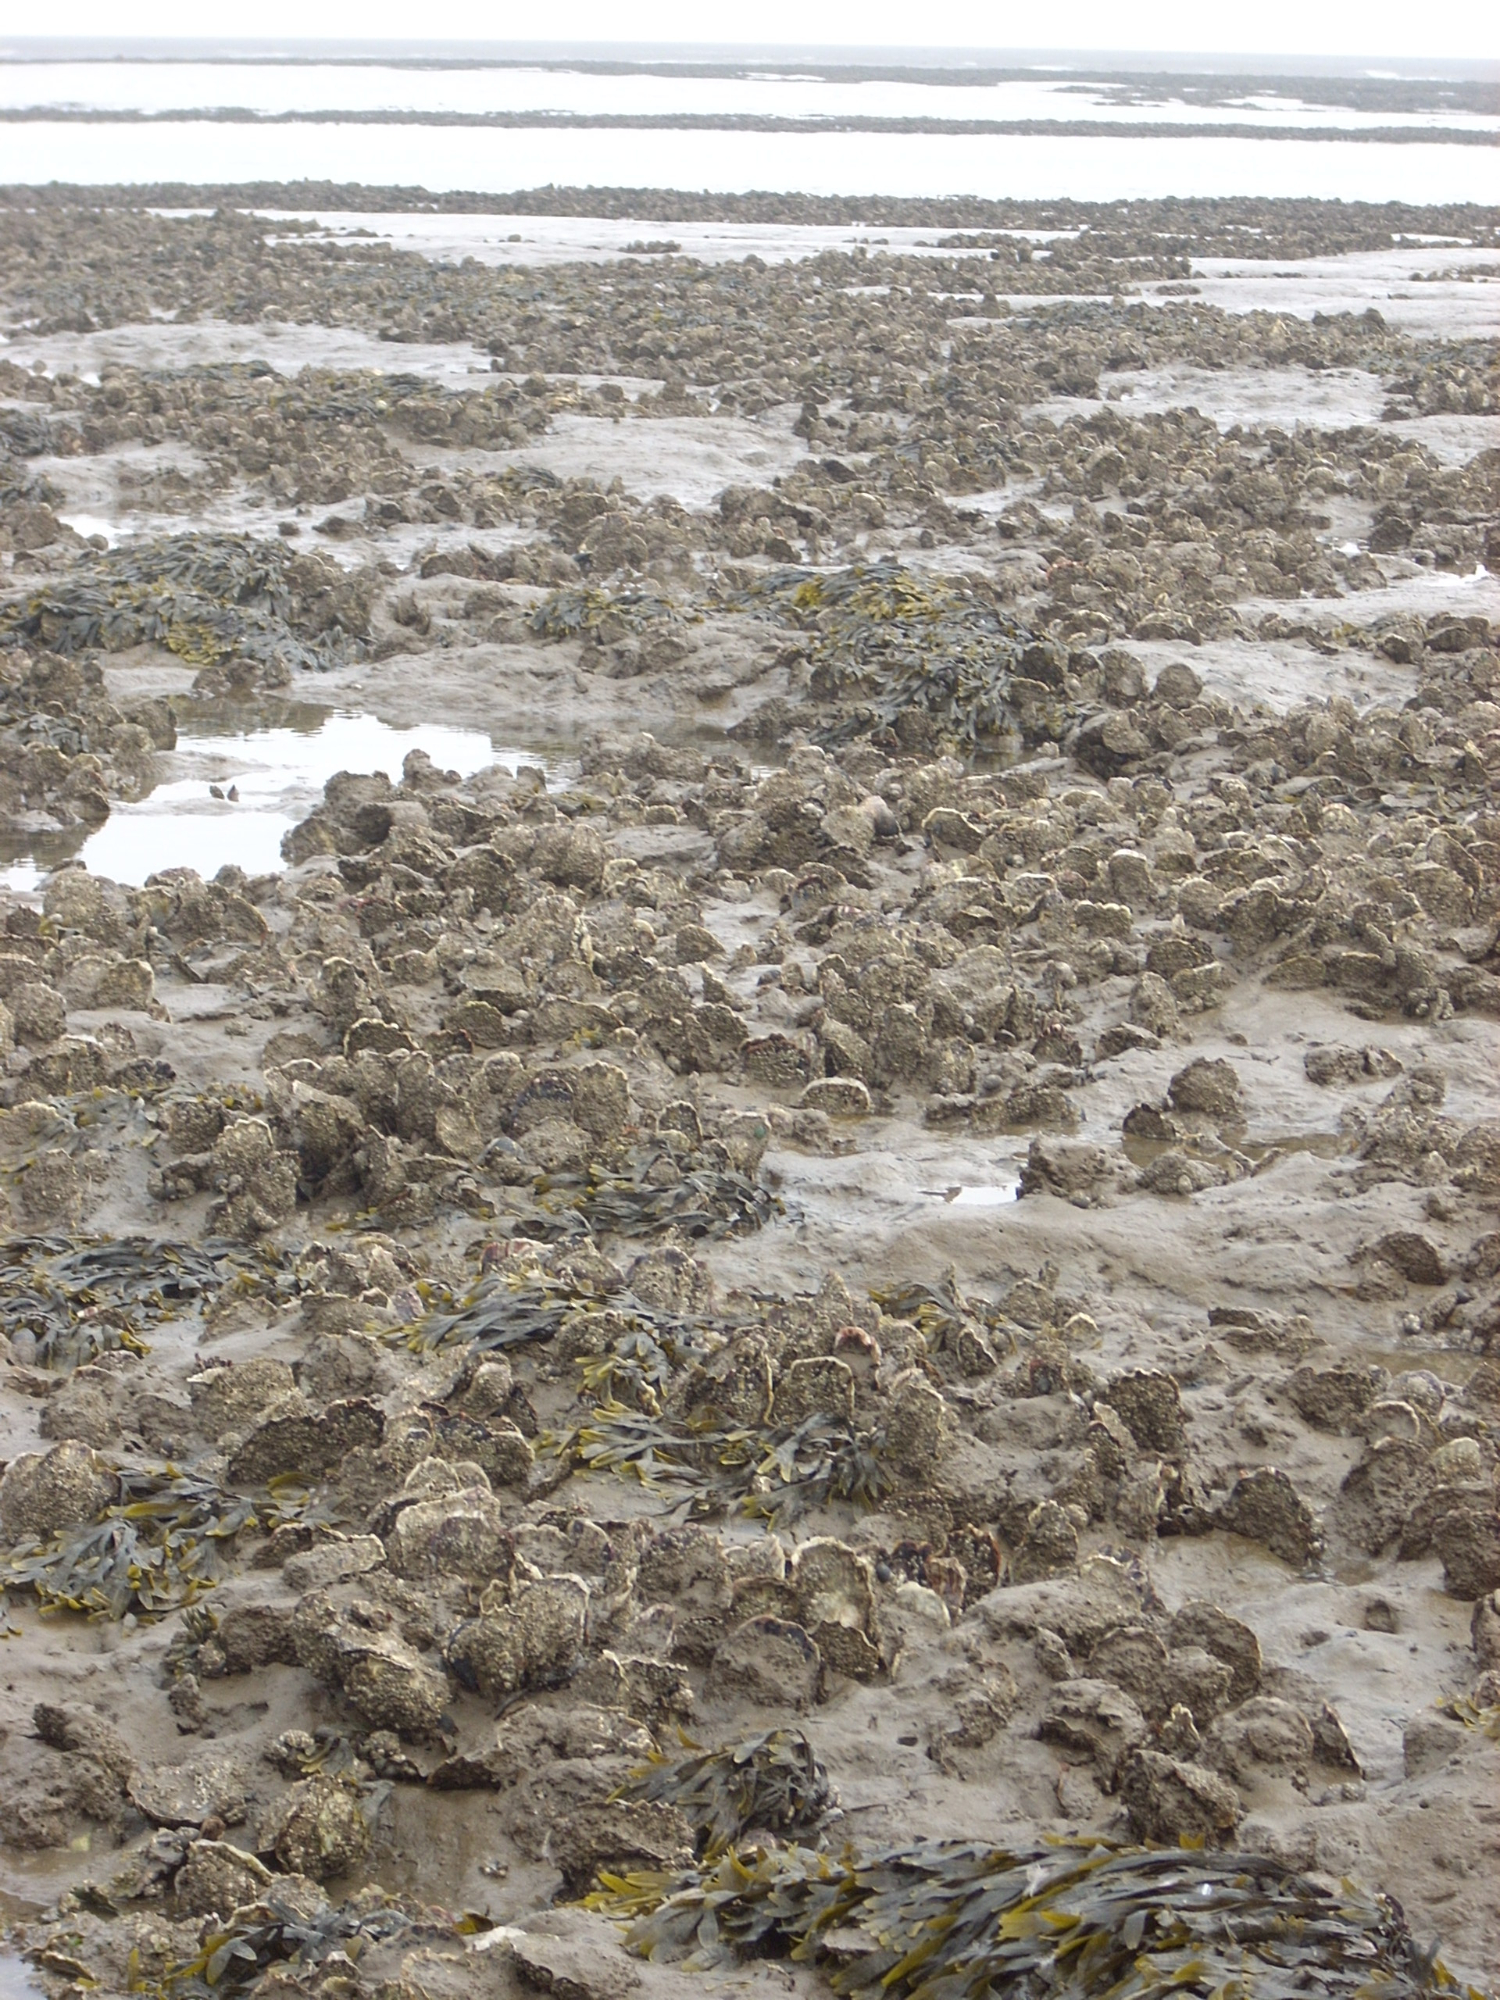 Section of a large oyster bed in the Wadden Sea